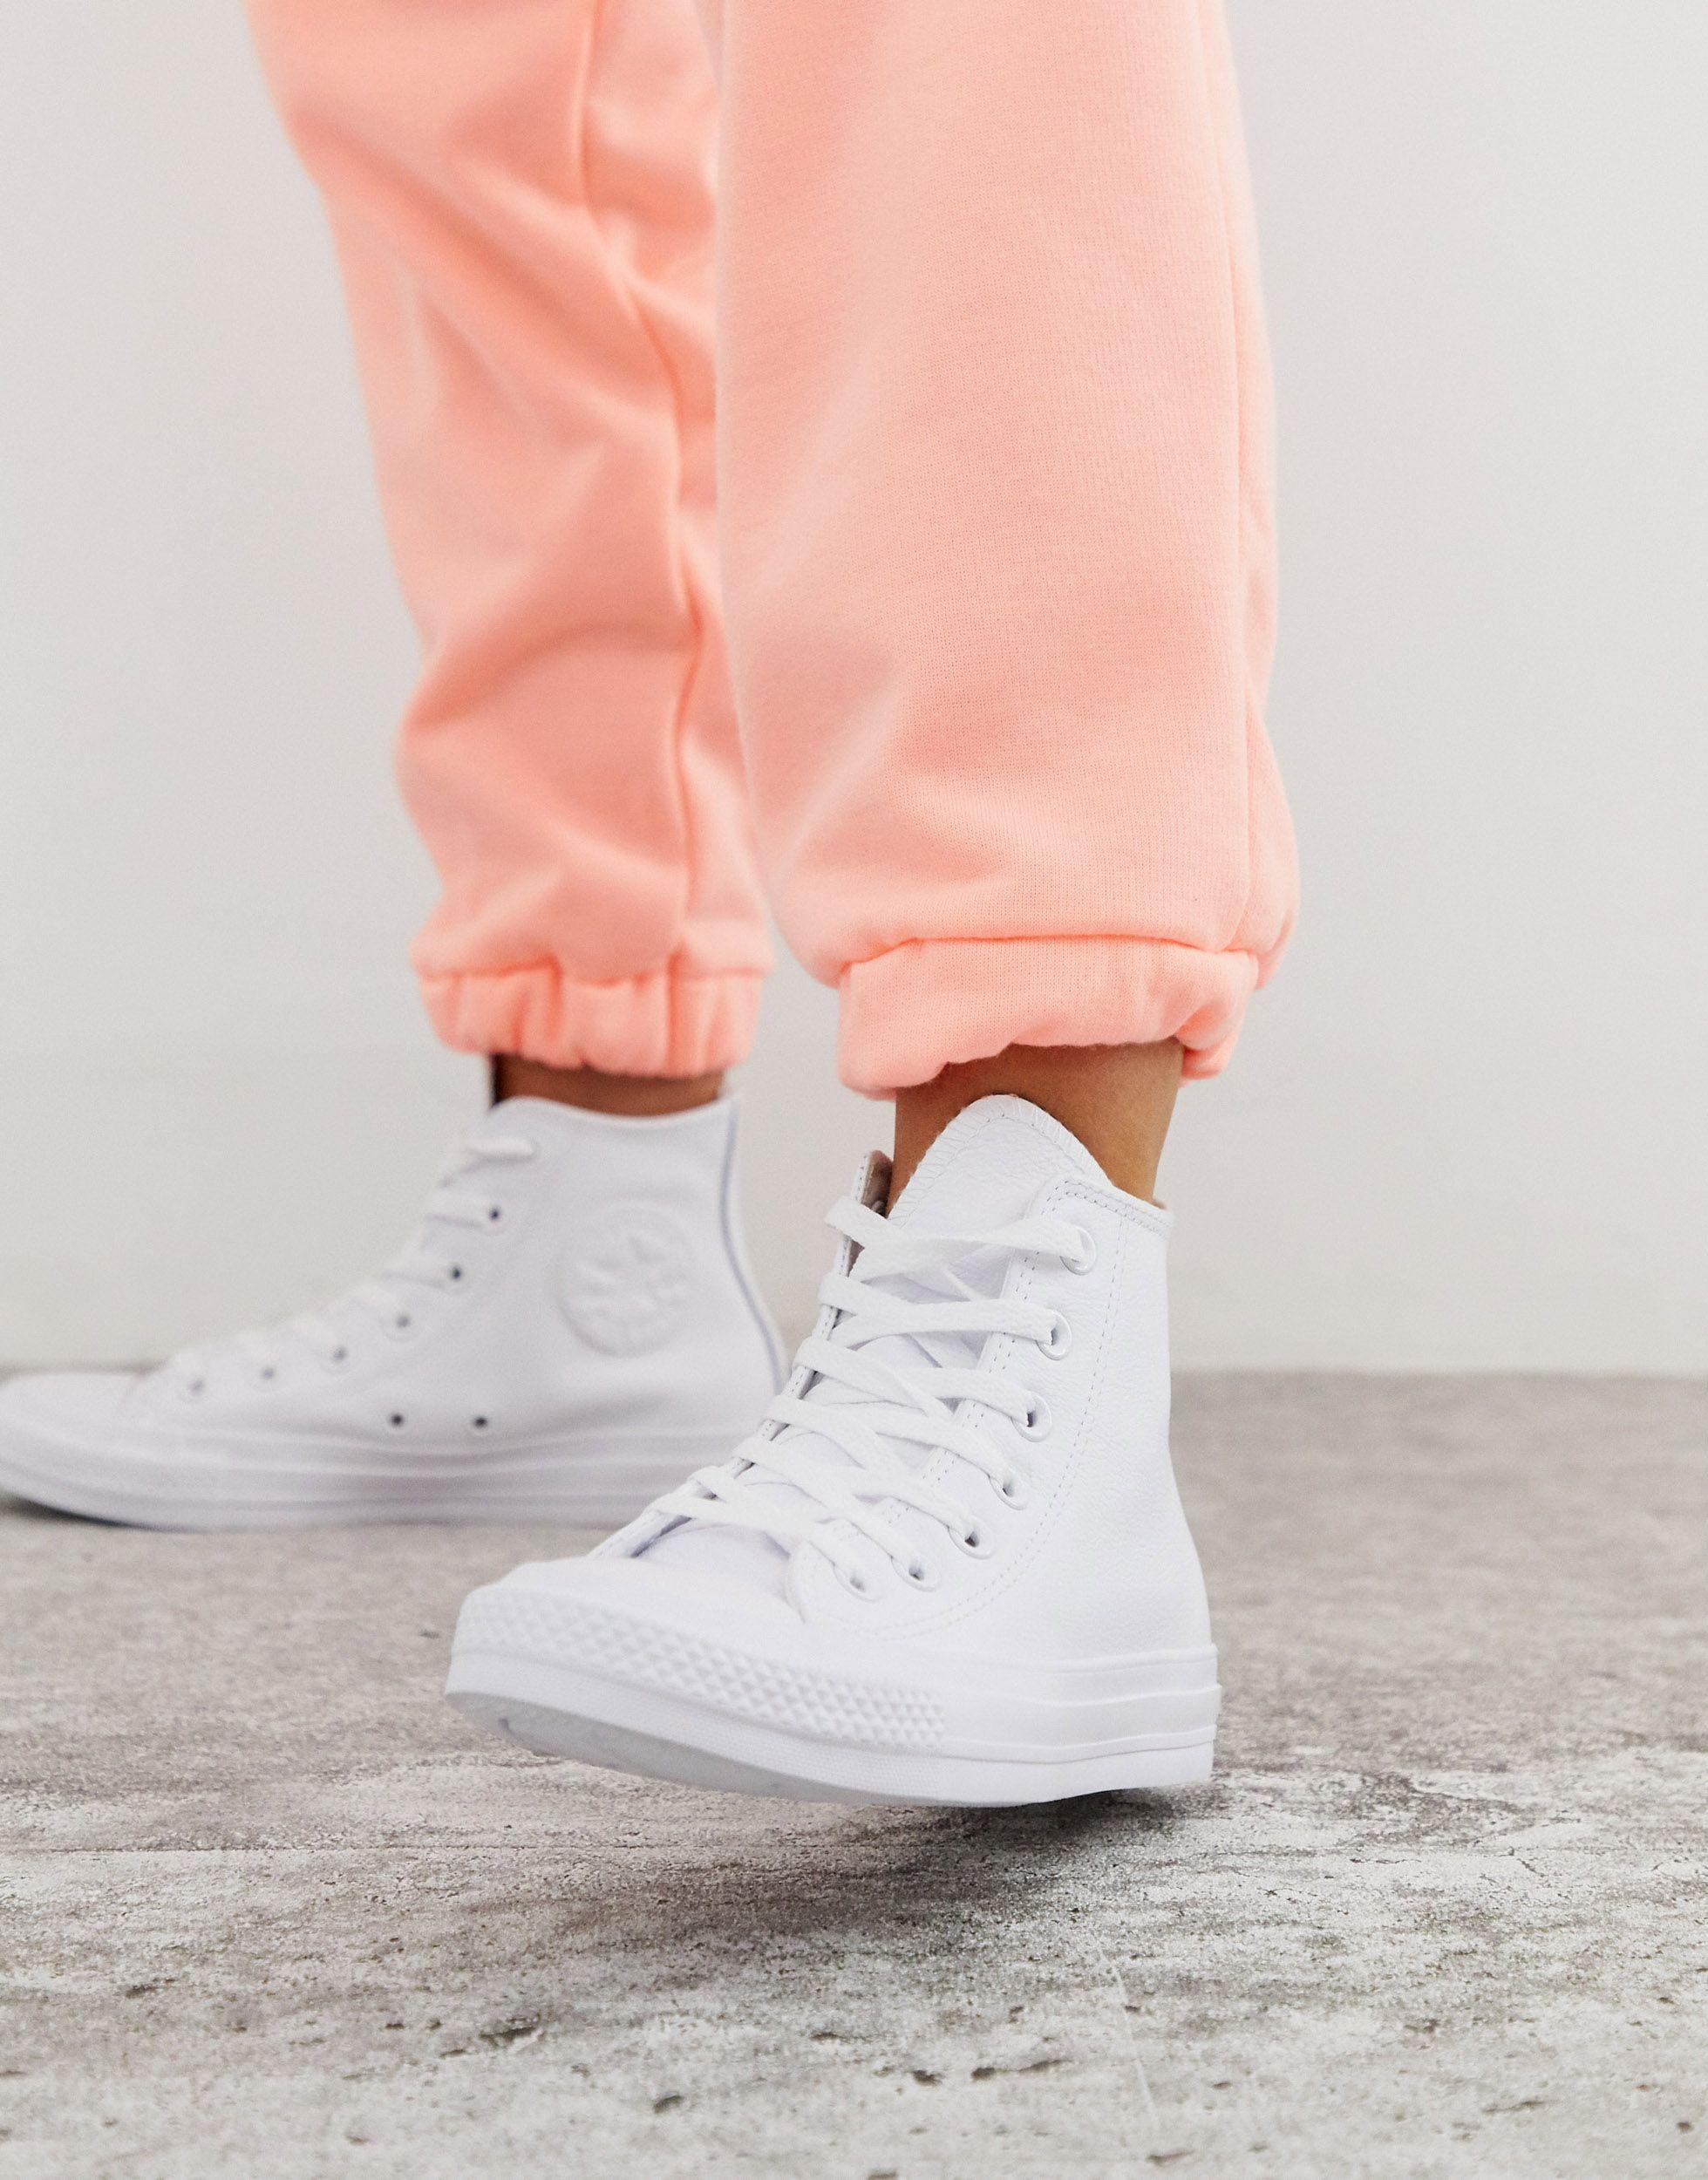 converse all star white leather high tops